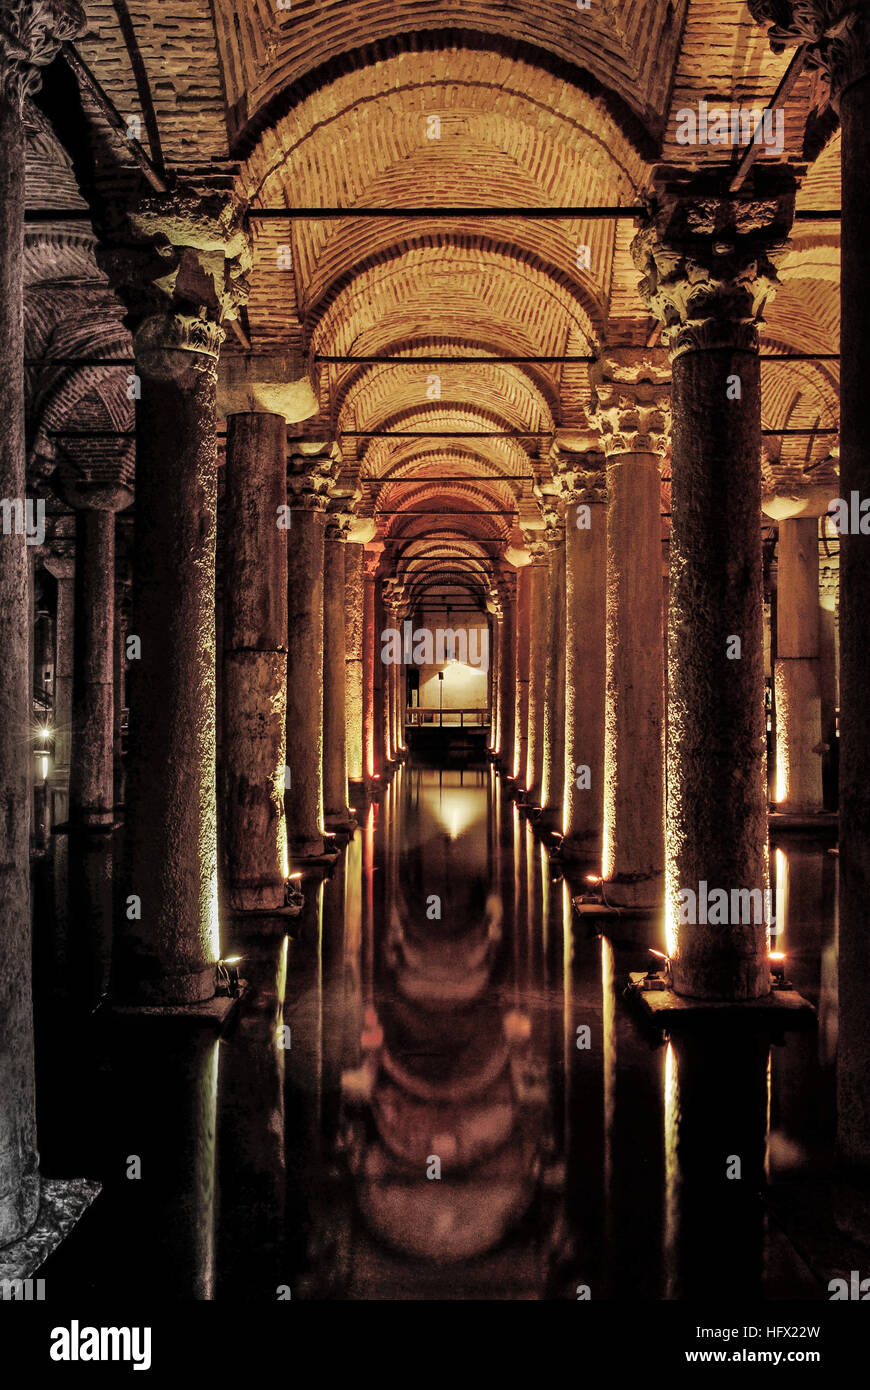 The Basilica Cistern, located in the crowded Eminonu district of Istanbul next to the Hagia Sophia, was built to provide water for the city of Istanbul during the reign of Emperor Justinian I in the 6th century CE. This cistern is an underground chamber of 138 x 64.6 metres. The large space is broken up by a forest of 336 marble columns, which are aesthetically supported by strong  columns and arches. The ceiling vaults, known as Manastir Tonozu (cloister vault), are built without using a mould. The cistern is surrounded by a firebrick wall with a thickness of 3.5 meters and is coated with a s Stock Photo